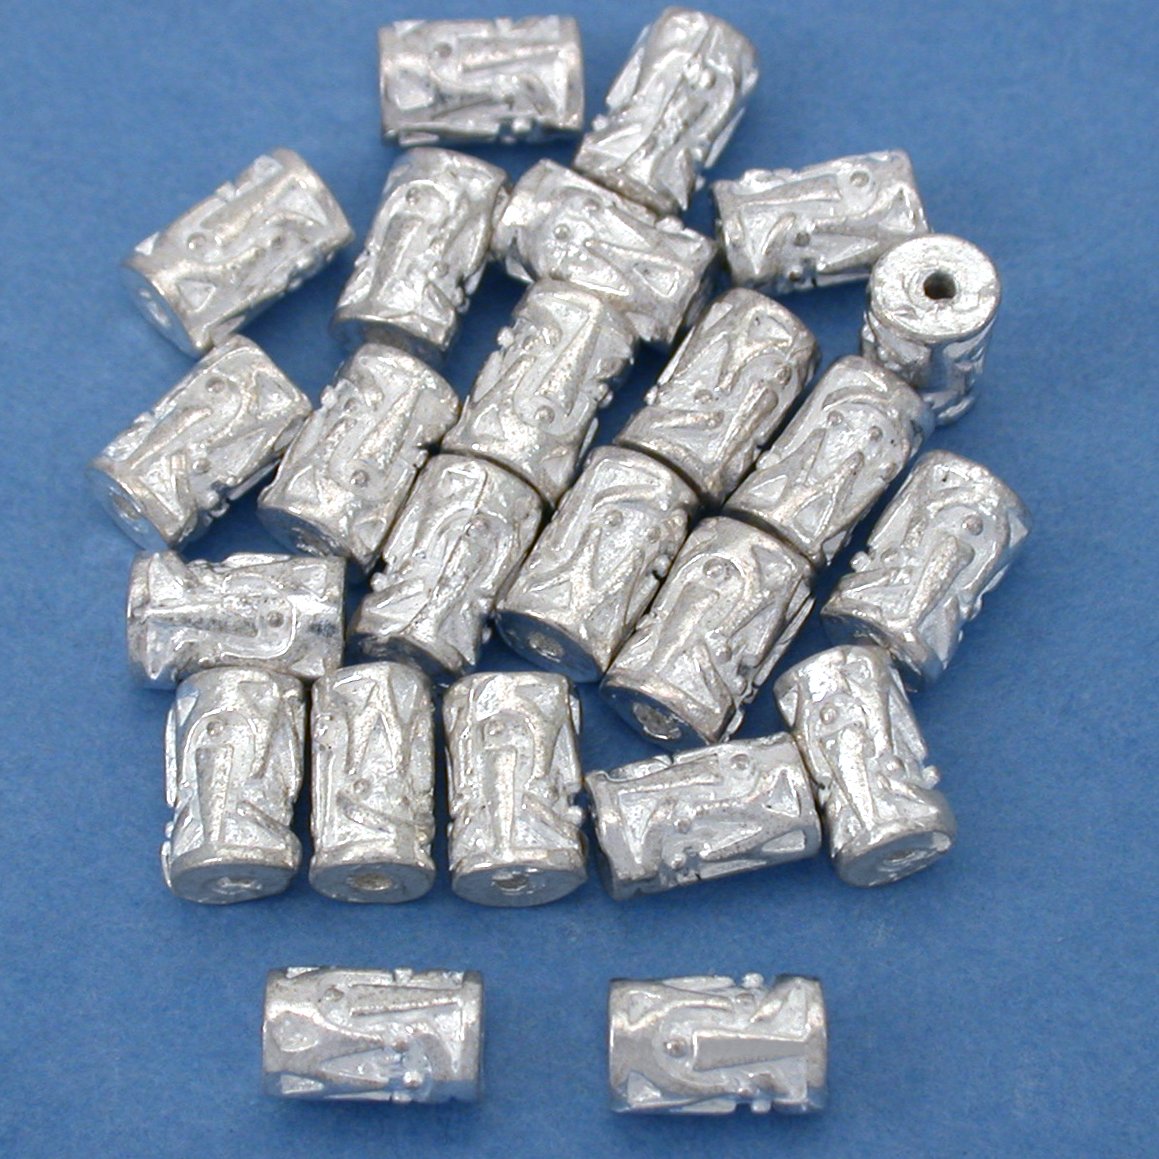 Bali Tube Silver Plated Beads 7mm 15 Grams 20Pcs Approx.